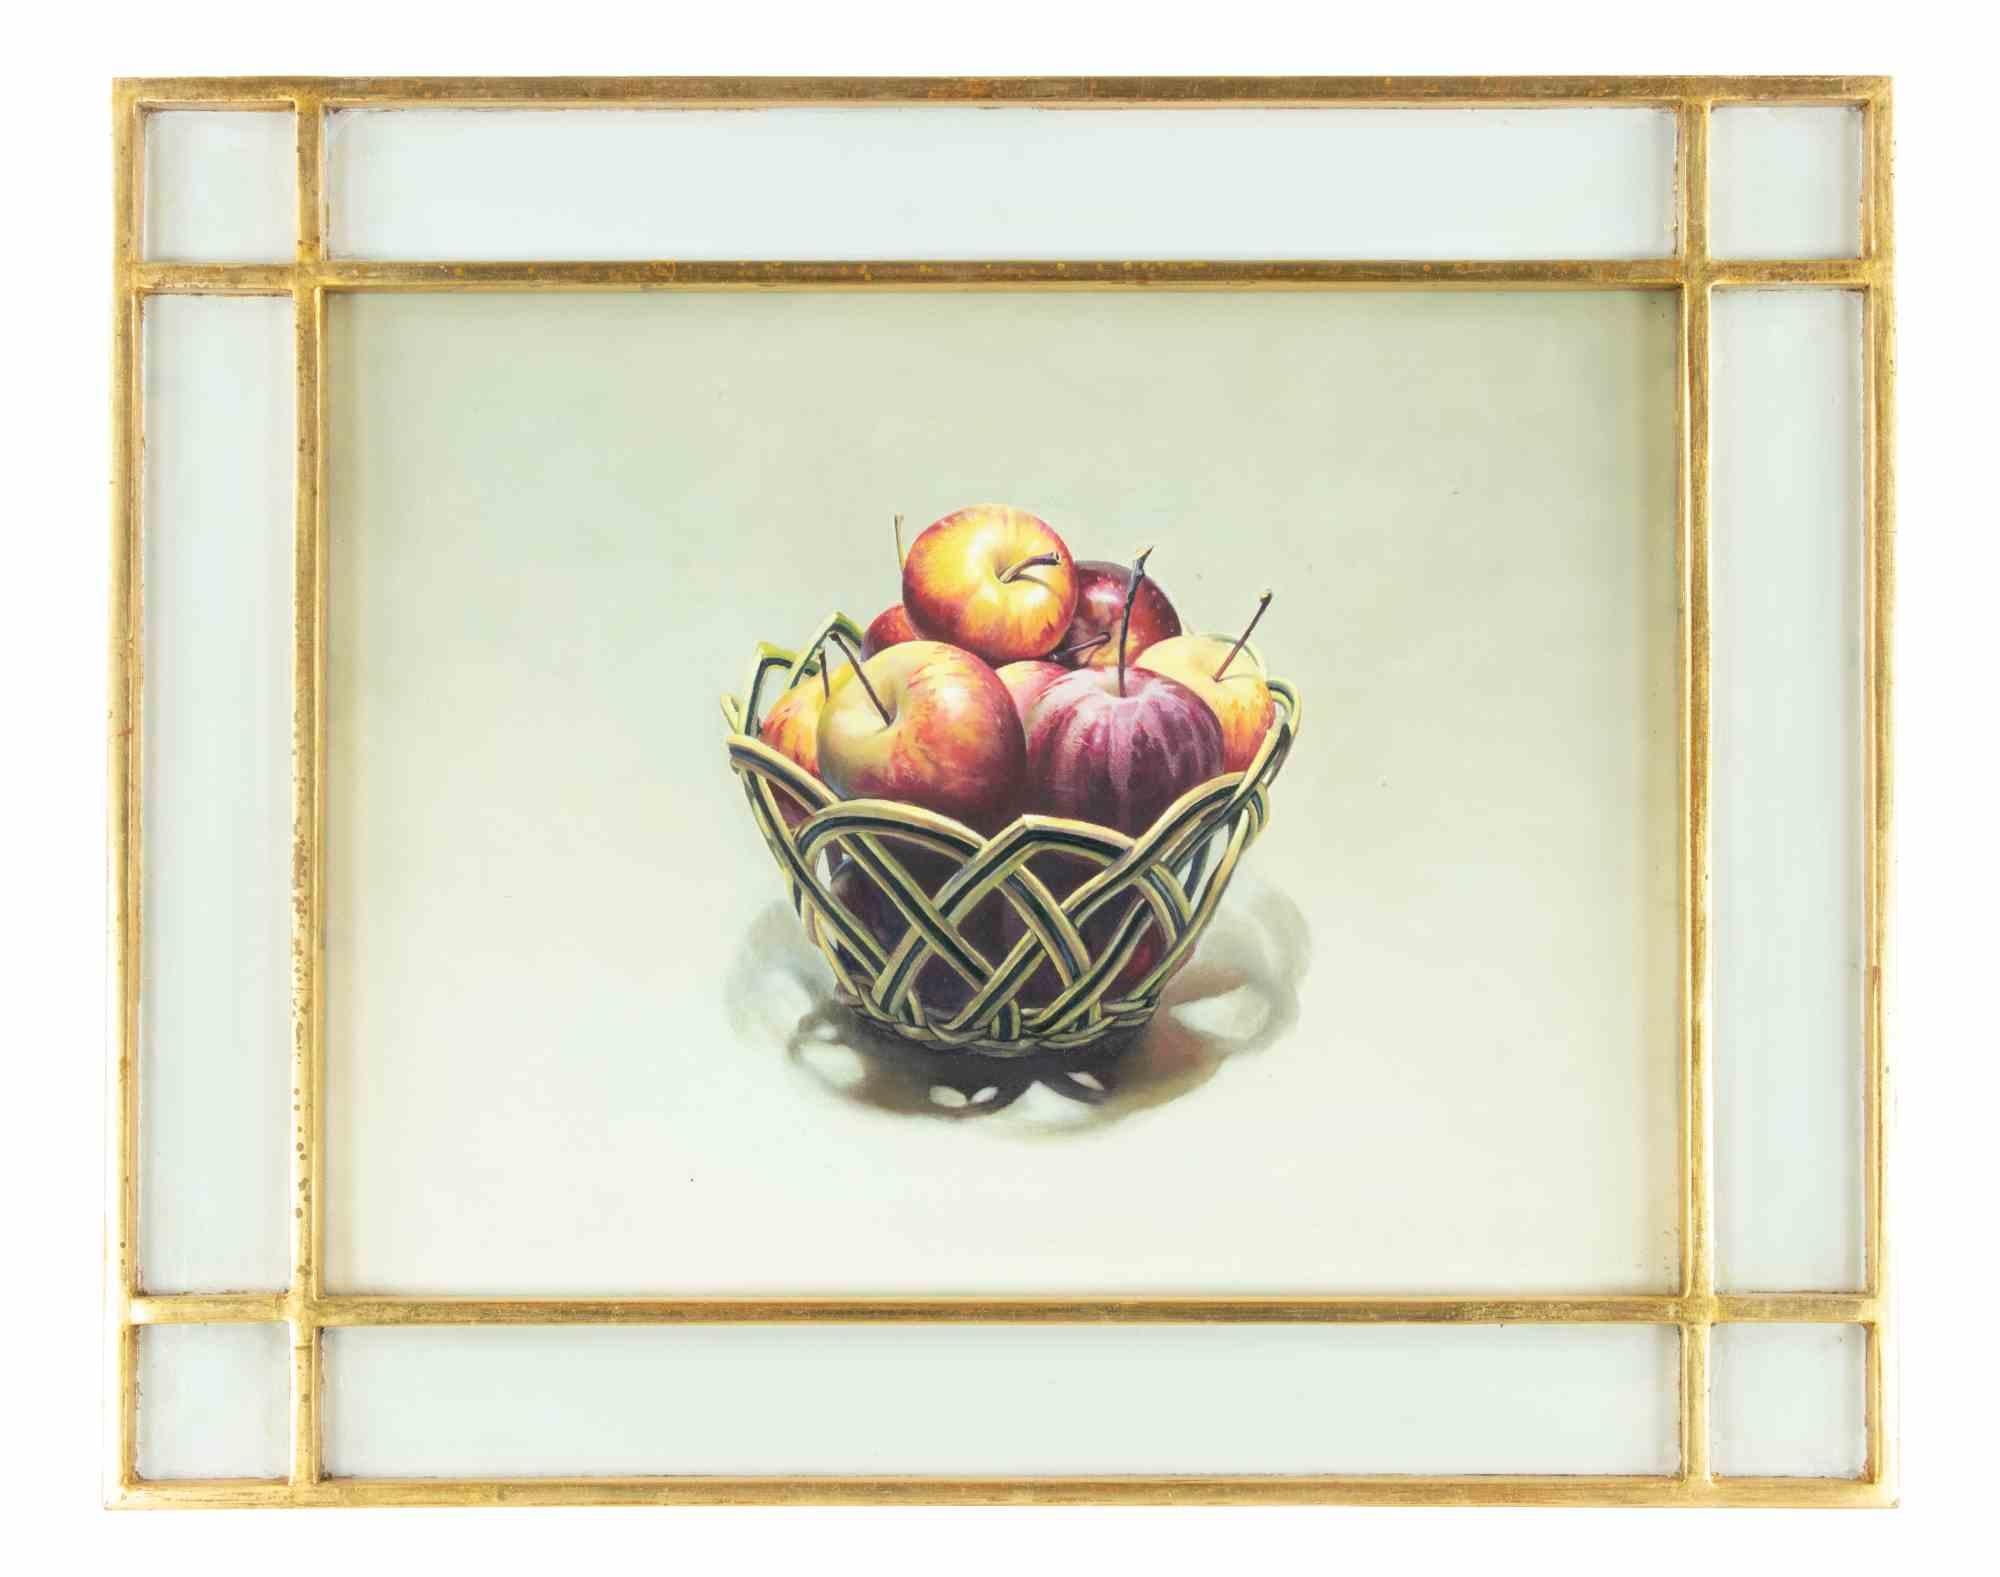 Still life is an oil painting realized in 2010sy by Zhang Wei Guang (Mirror).

Oil painting on canvas. 

Includes frame: 41 x 3 x 50 cm

Hand-signed and dated on the back.

Zhang Wei Guang , also called ‘mirror' was born in Helong Jang, China in